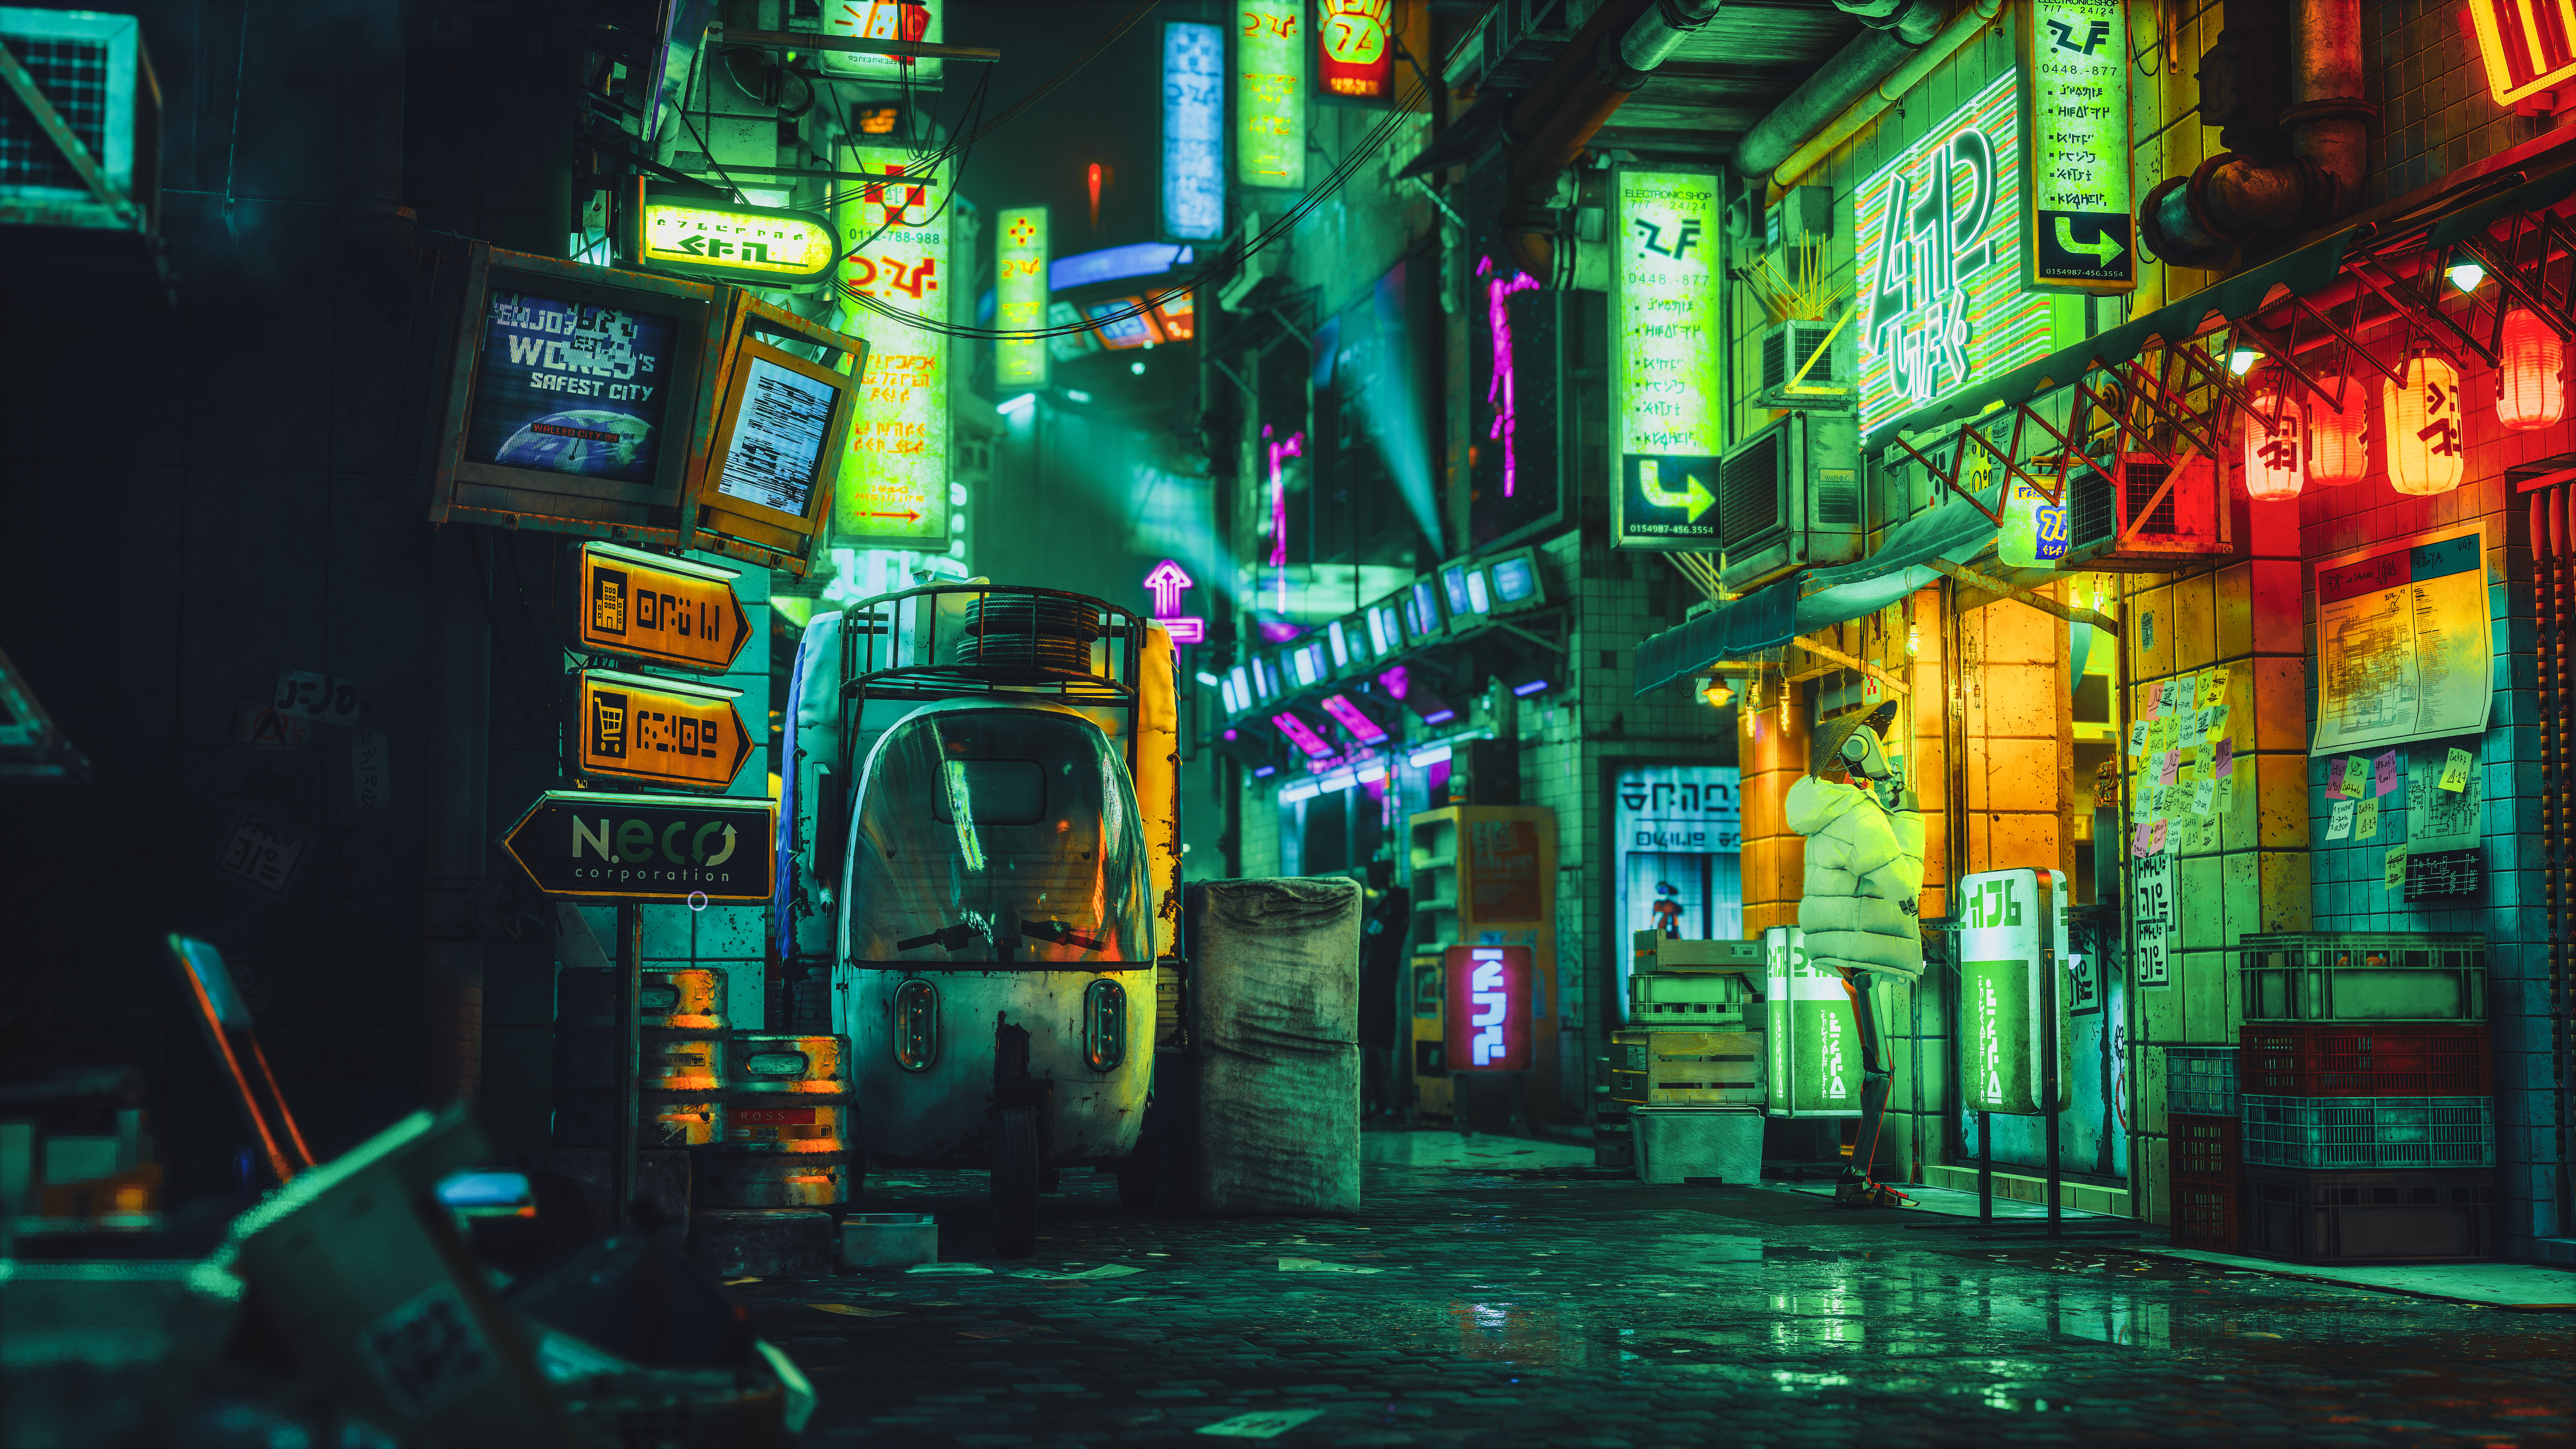 General 7680x4320 Stray video games city neon city lights video game art